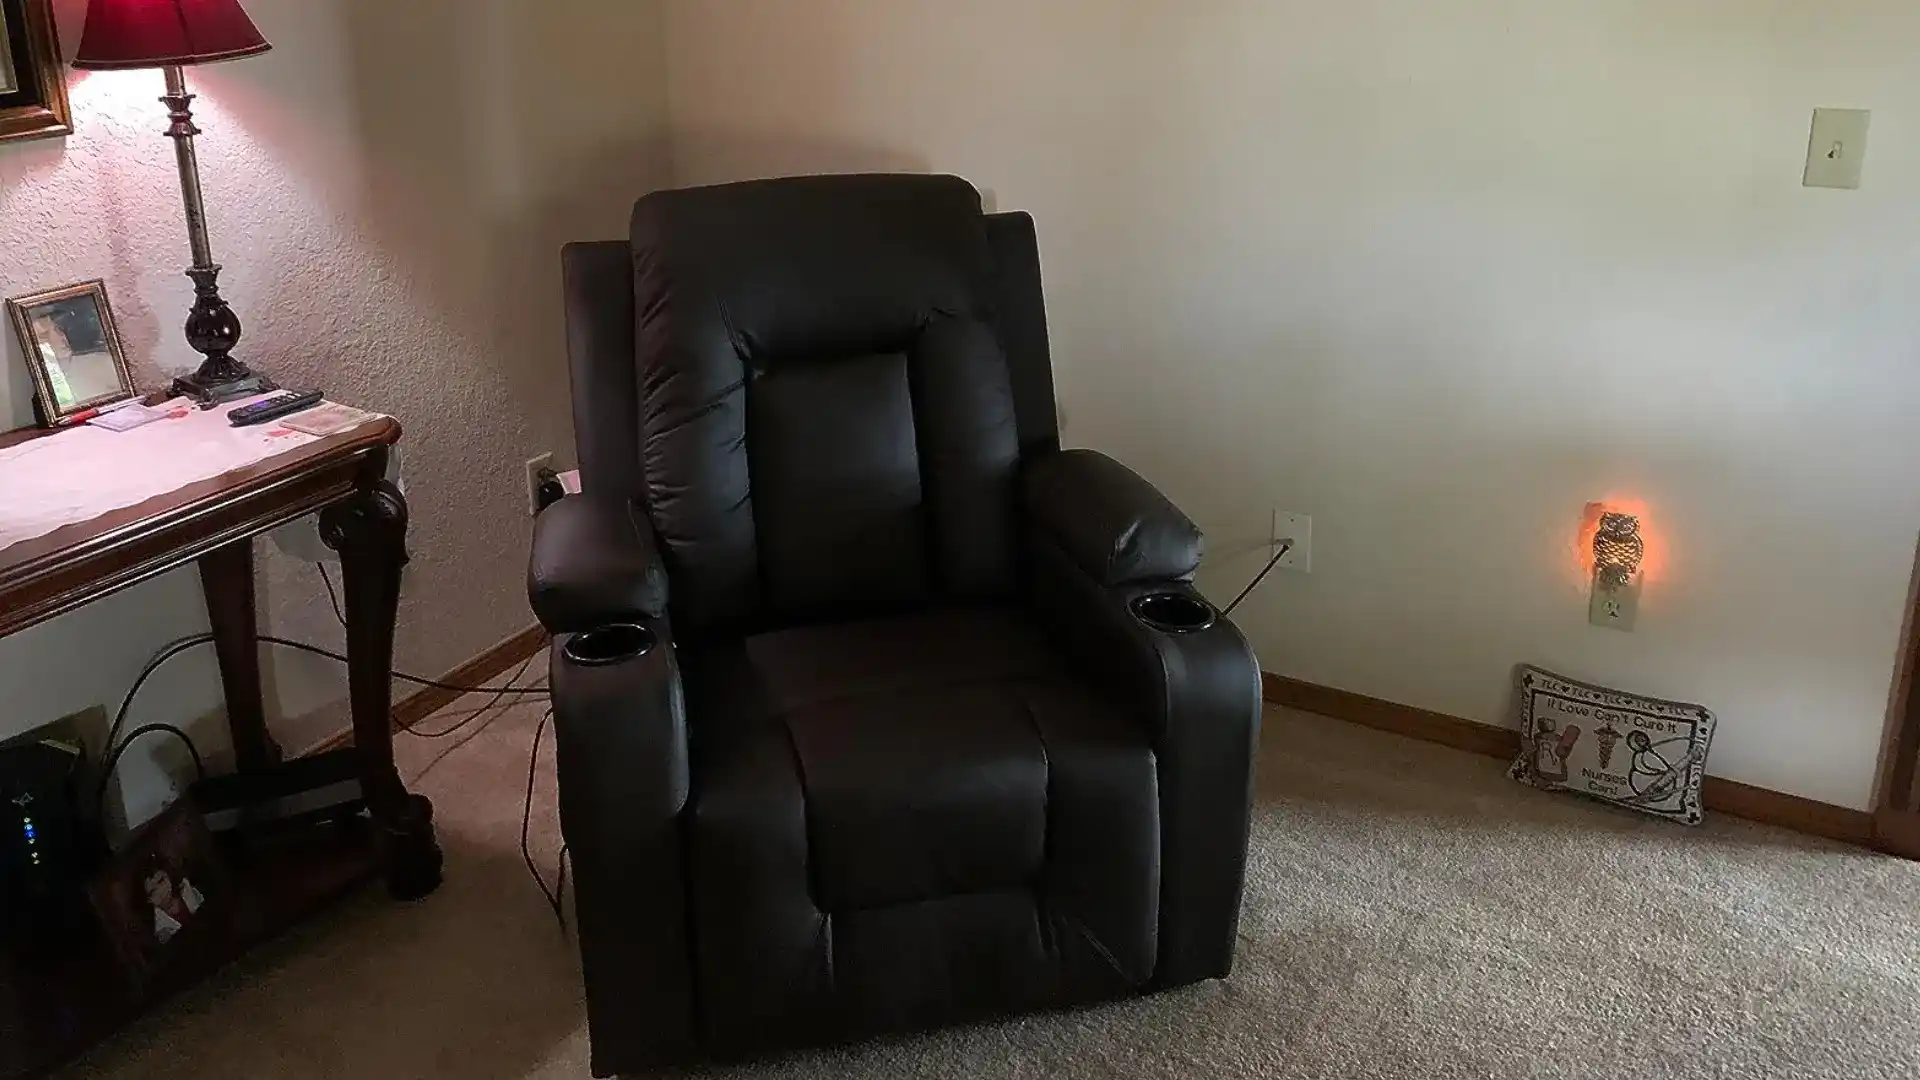 Comhoma Leather Recliner Chair